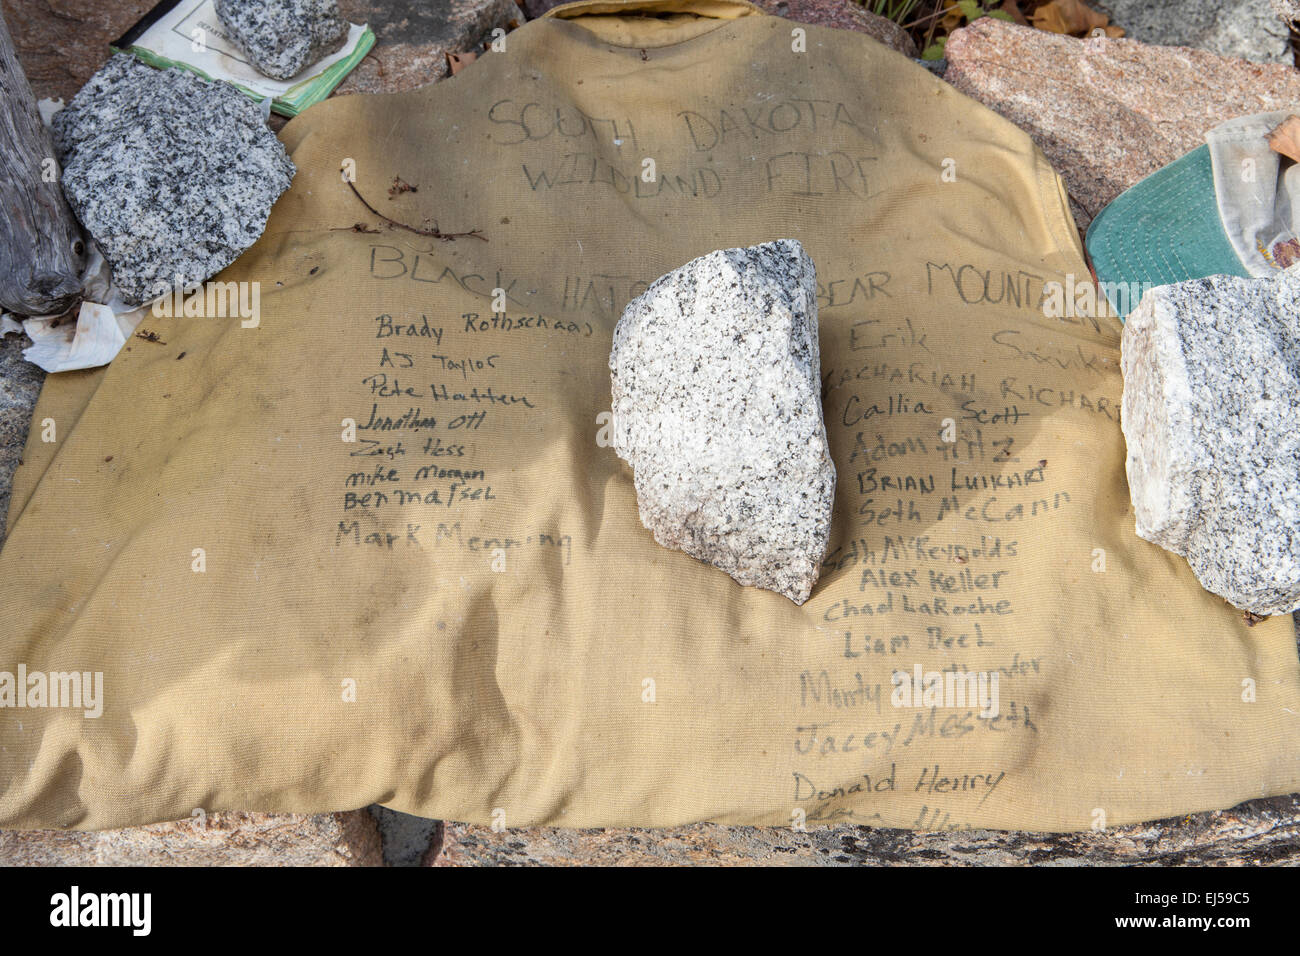 A signed t-shirt is left in remembrance at the Thirtymile Fire Memorial along the Chewuch Road in the Pasayten Wilderness, North Stock Photo